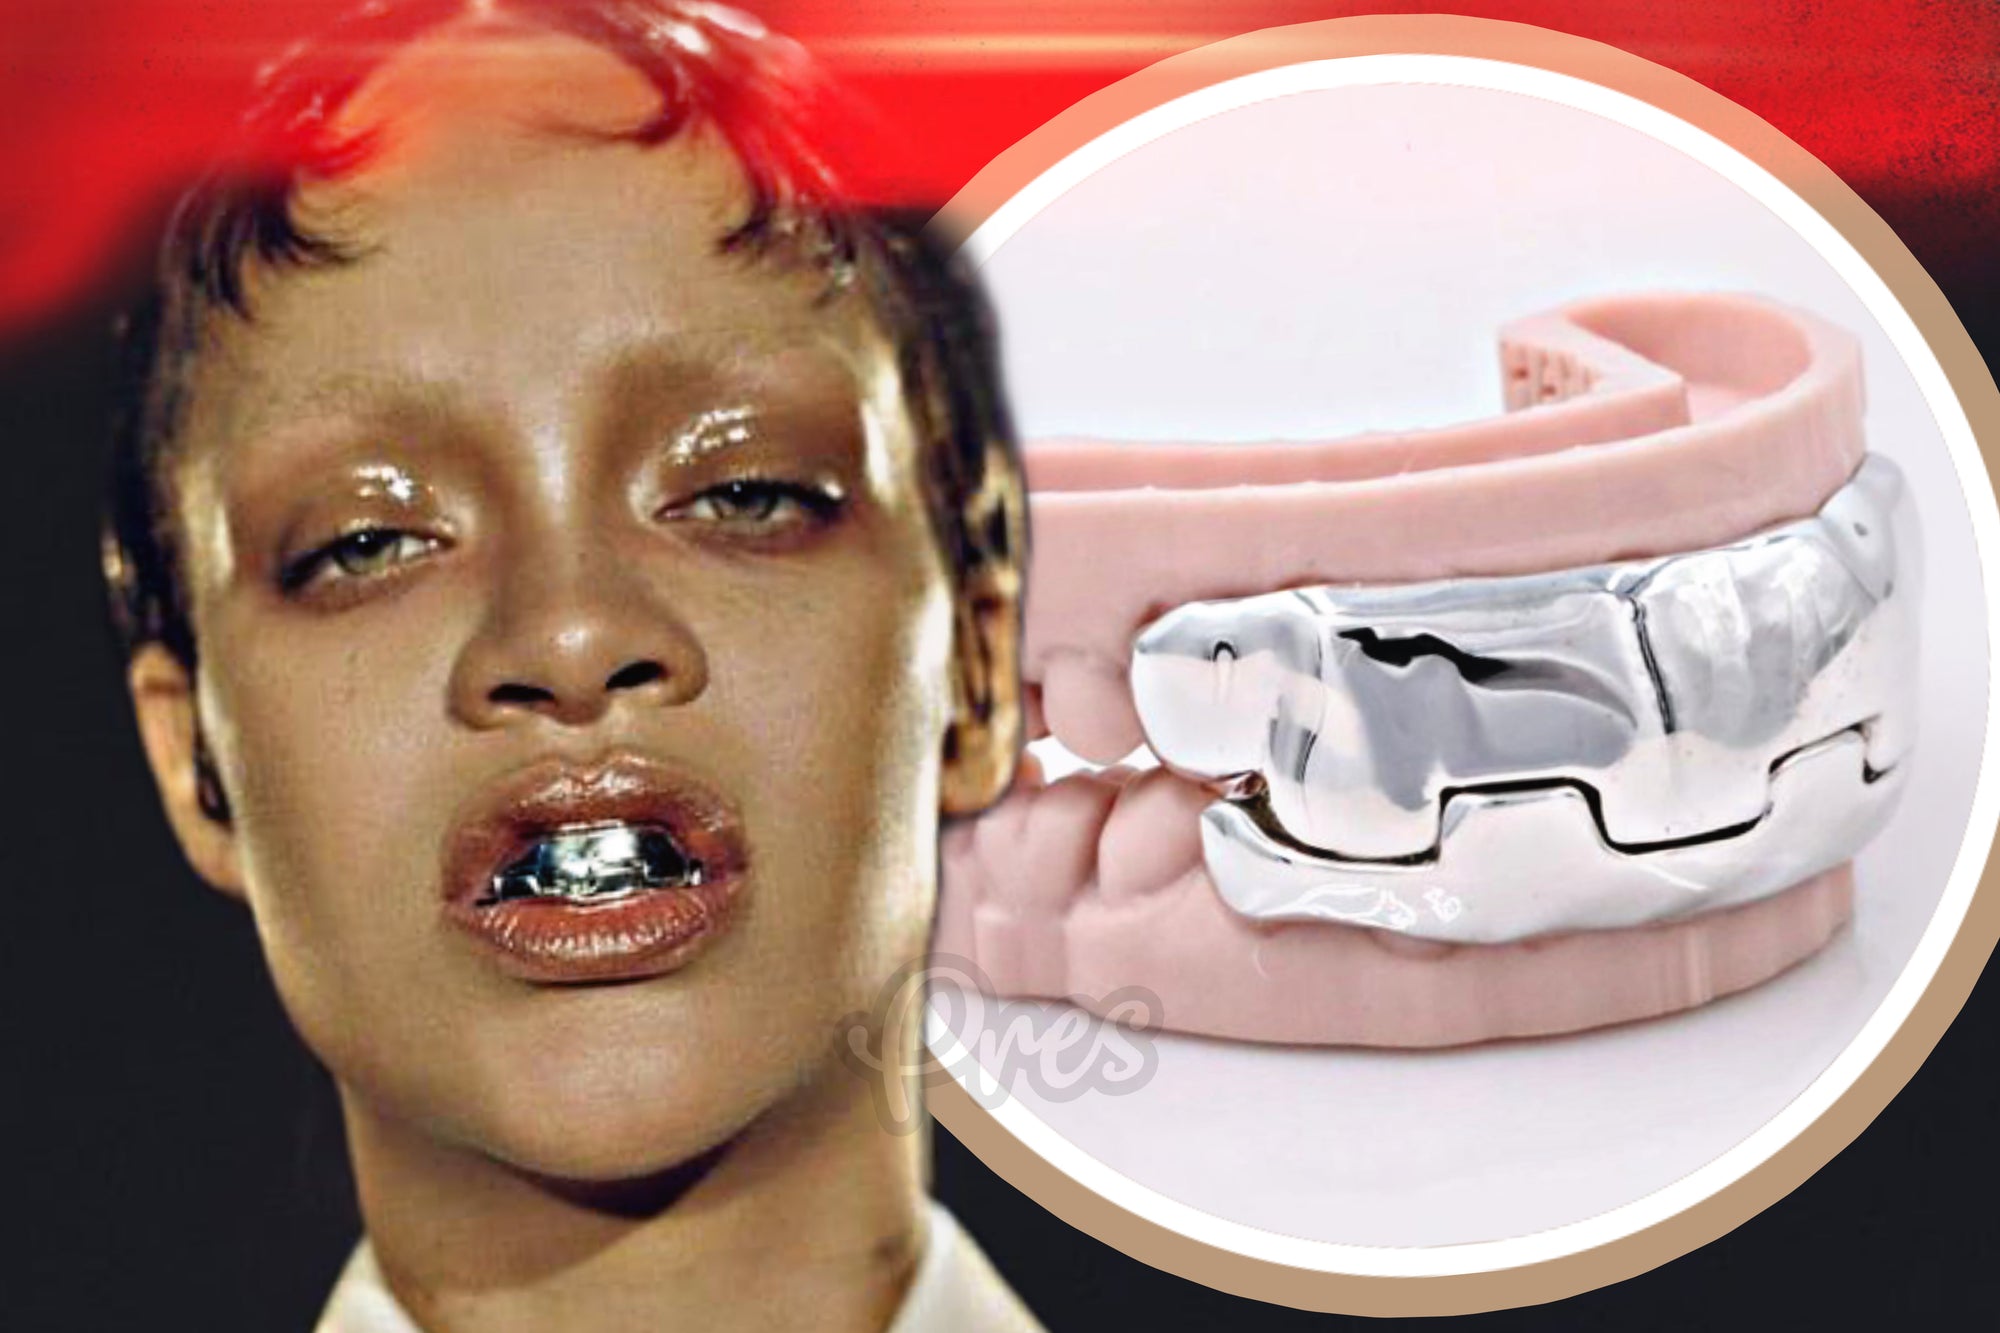 Rihanna Sports Metallic Grill Inspired by Kanye West and James Bond Villain 'Jaws'